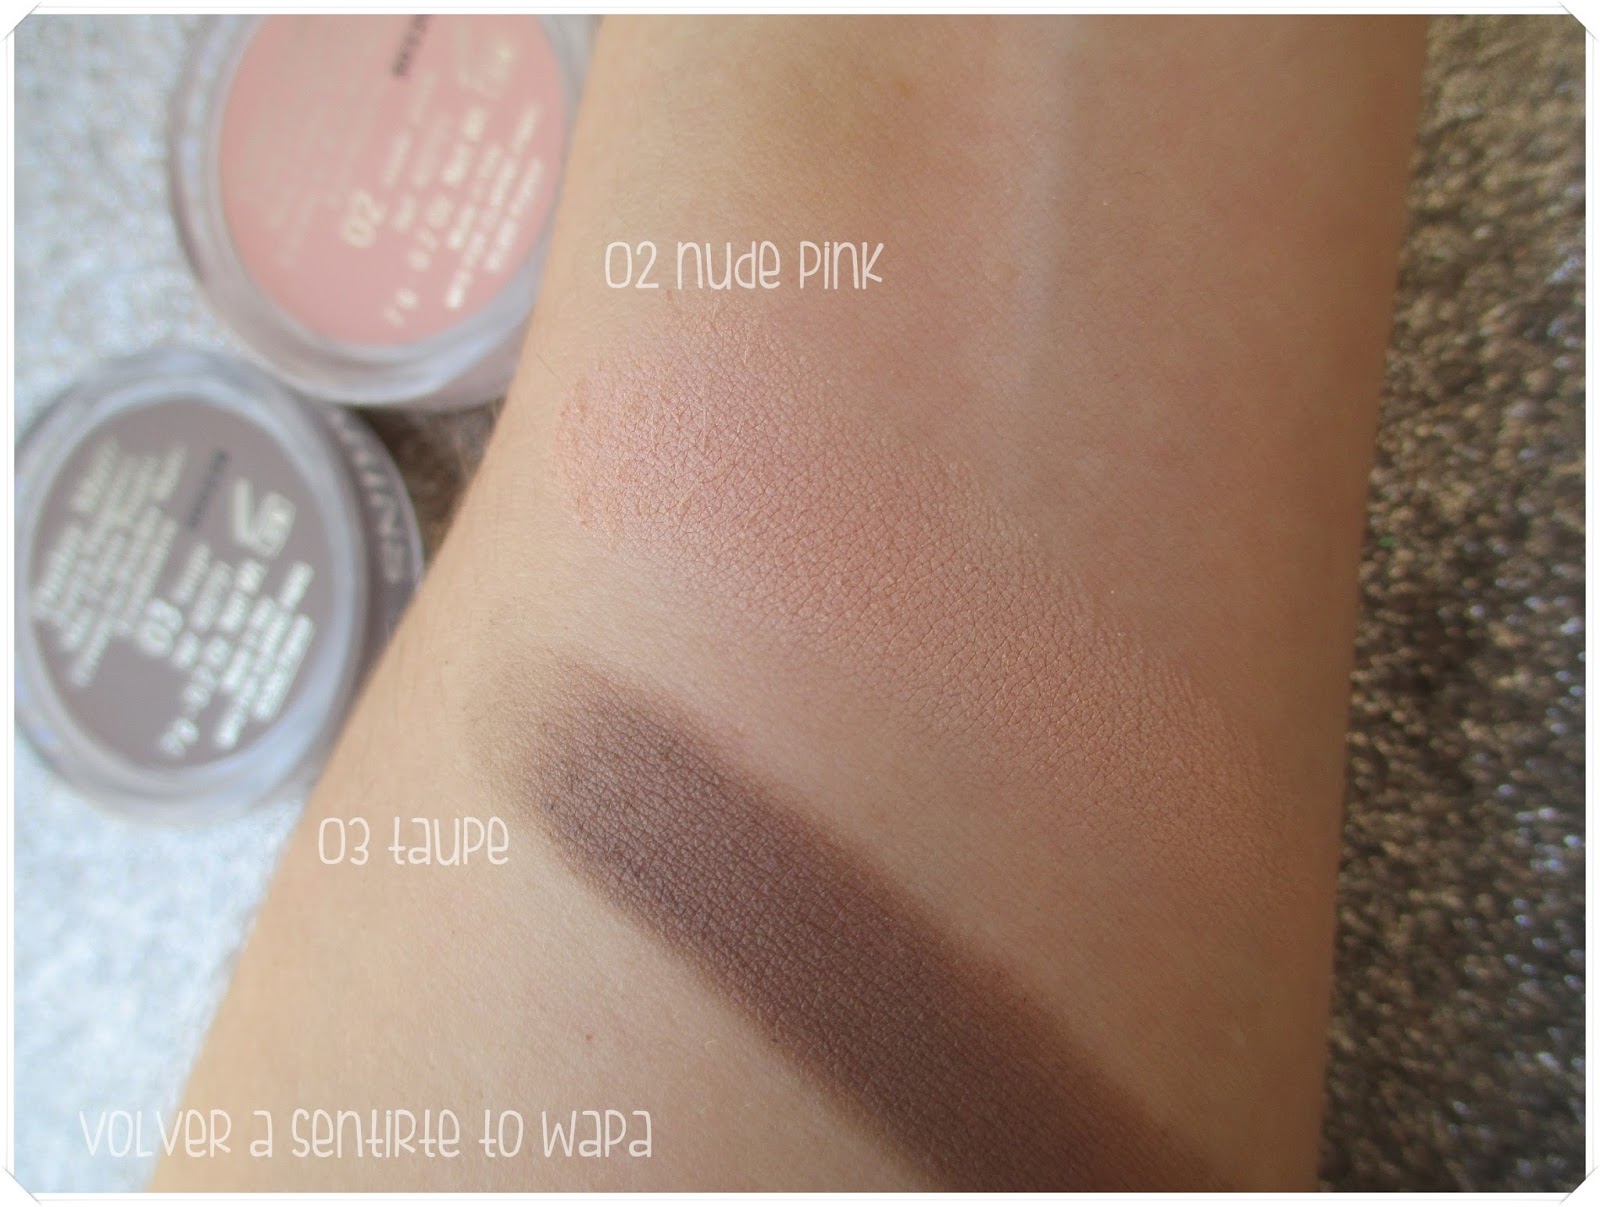 Ombre Matte de Clarins - 02 nude pink y 03 taupe - Swatches